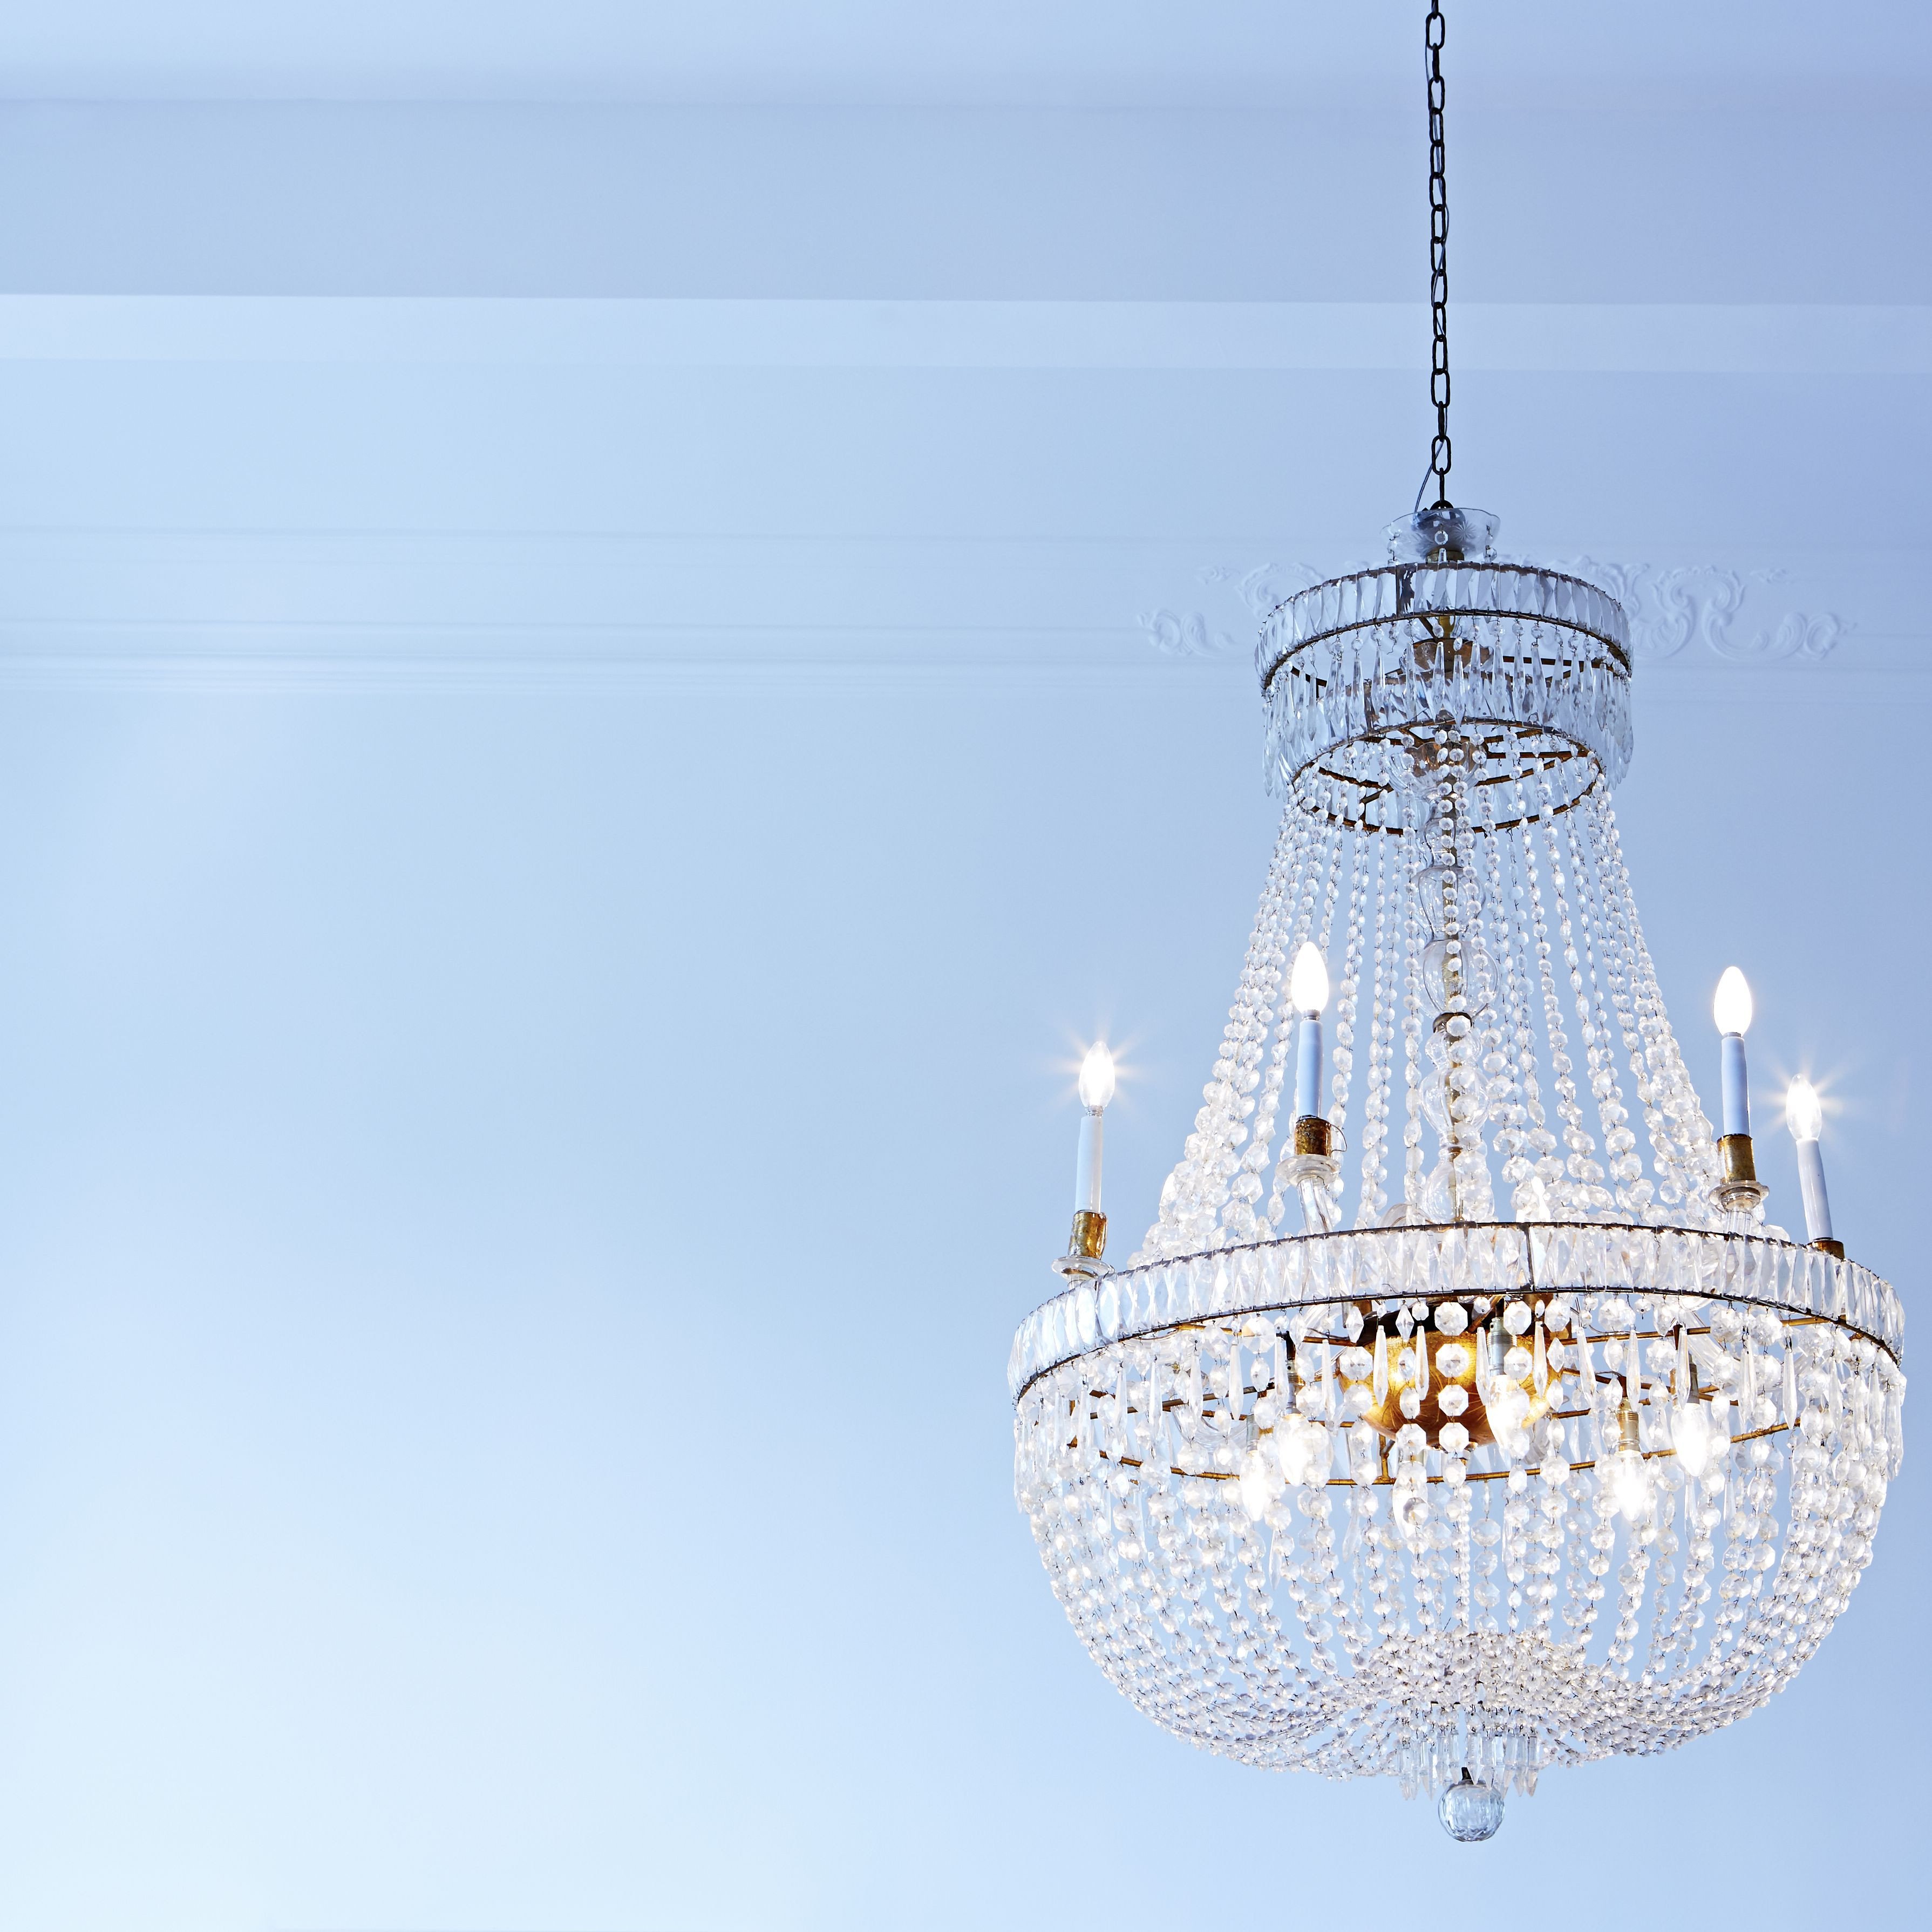 Girls Bedroom Ceiling Light Fresh How to Determine the Right Chandelier Size for A Room